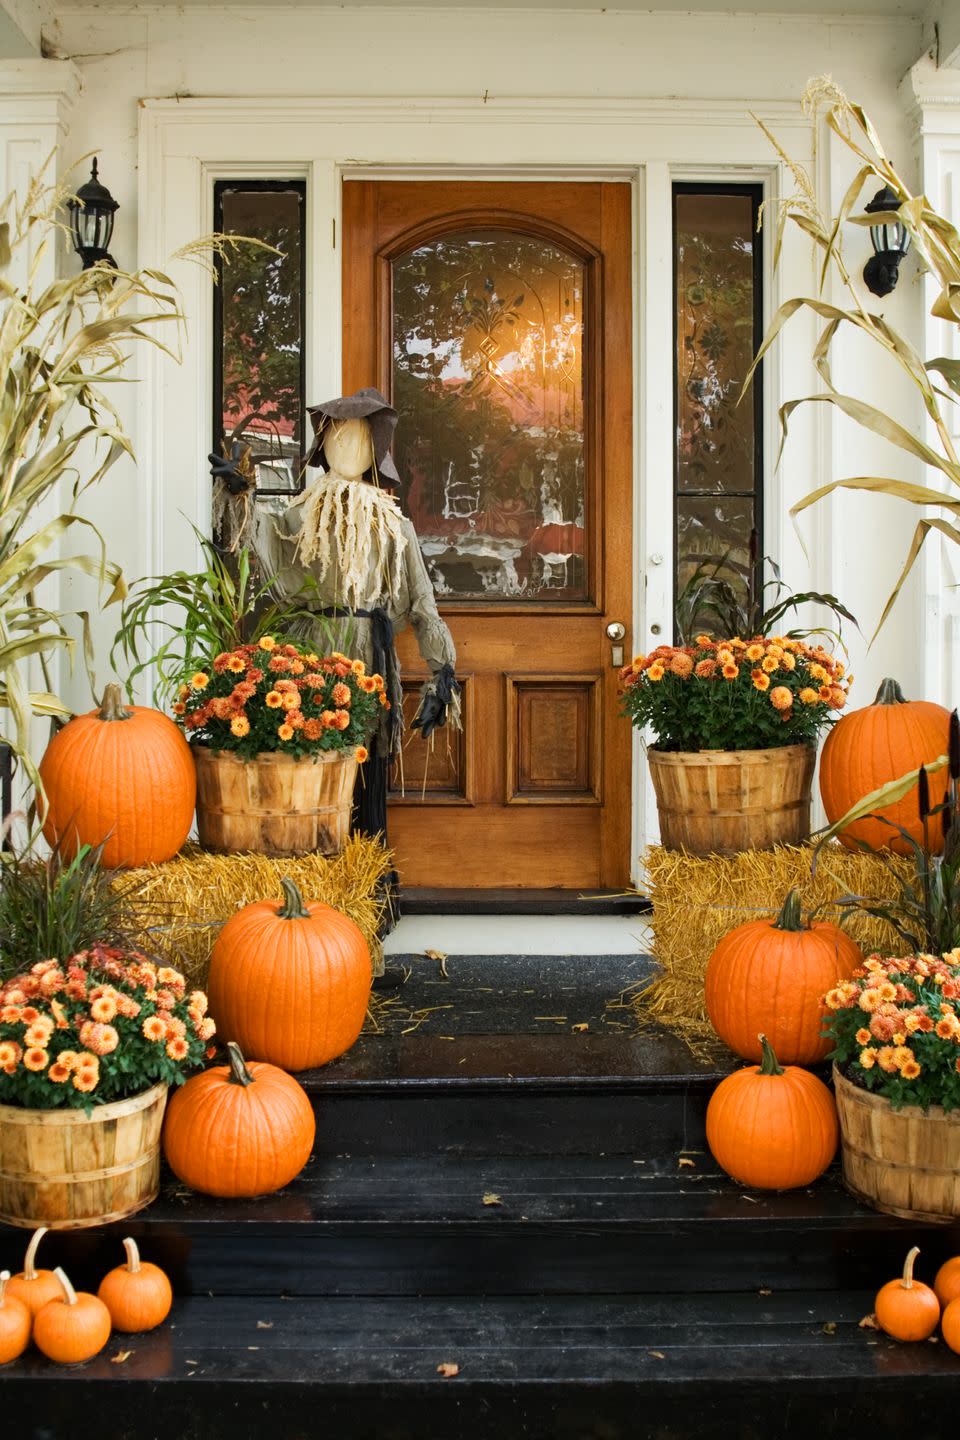 <p>You've stocked up at the pumpkin patch, toured the corn maze, and gathered all the inspiration and materials you need to create this lush and multilayered door decoration. So nestle mums in apple baskets, create height with hay bales, frame the scene with corn stalks, and place a friendly scarecrow by the door to greet guests. Door decor win!<br></p>